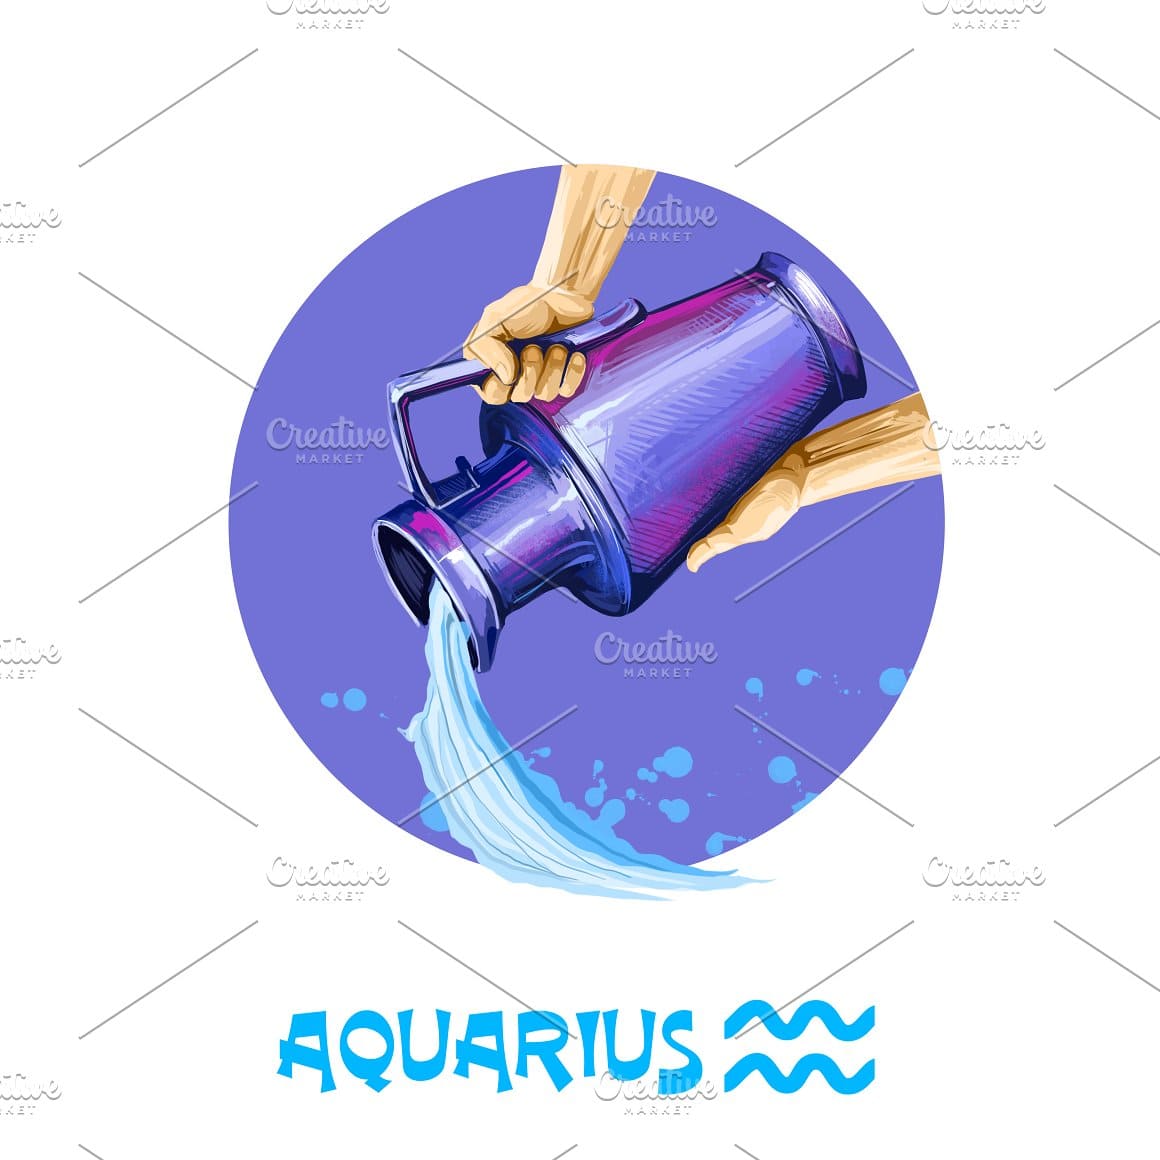 A painted jug with water is the symbol of Aquarius.